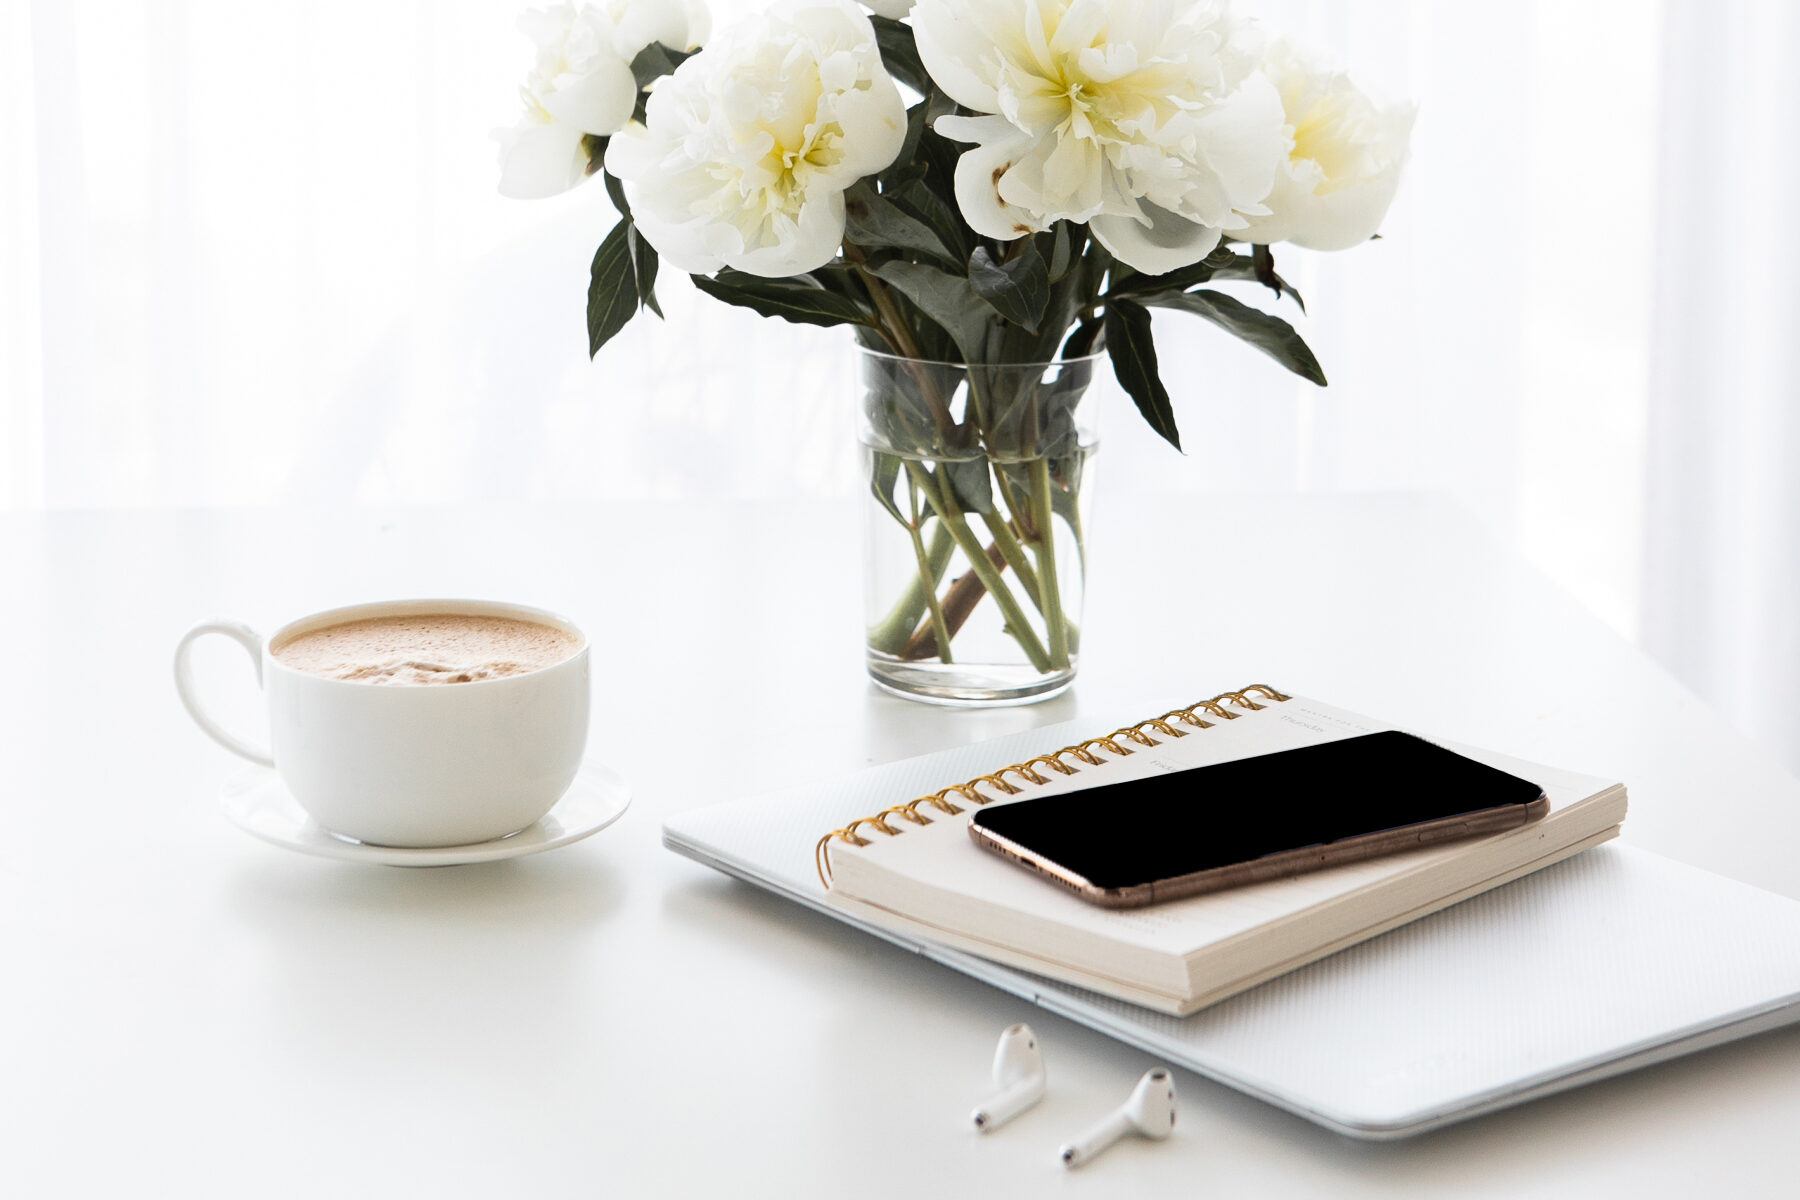 laptop, notebook, phone, cup of coffee, and white flowers | Carlisle & Co. digital marketing agency